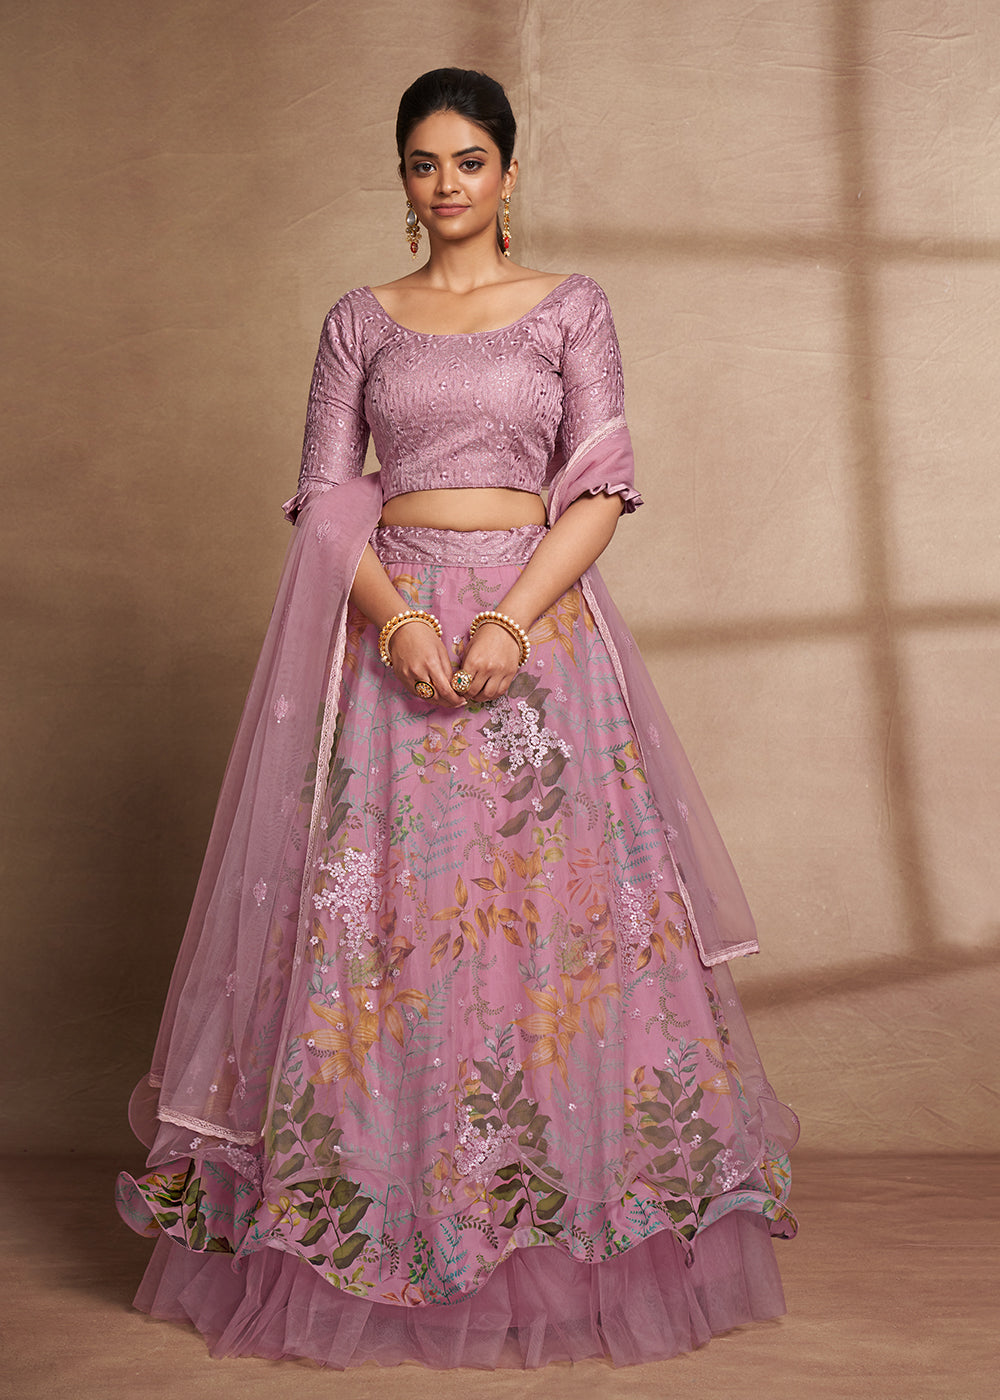 Buy Now Lovely Purple Floral Digital Printed & Embroidered Lehenga Choli Online in USA, UK, Canada & Worldwide at Empress Clothing.